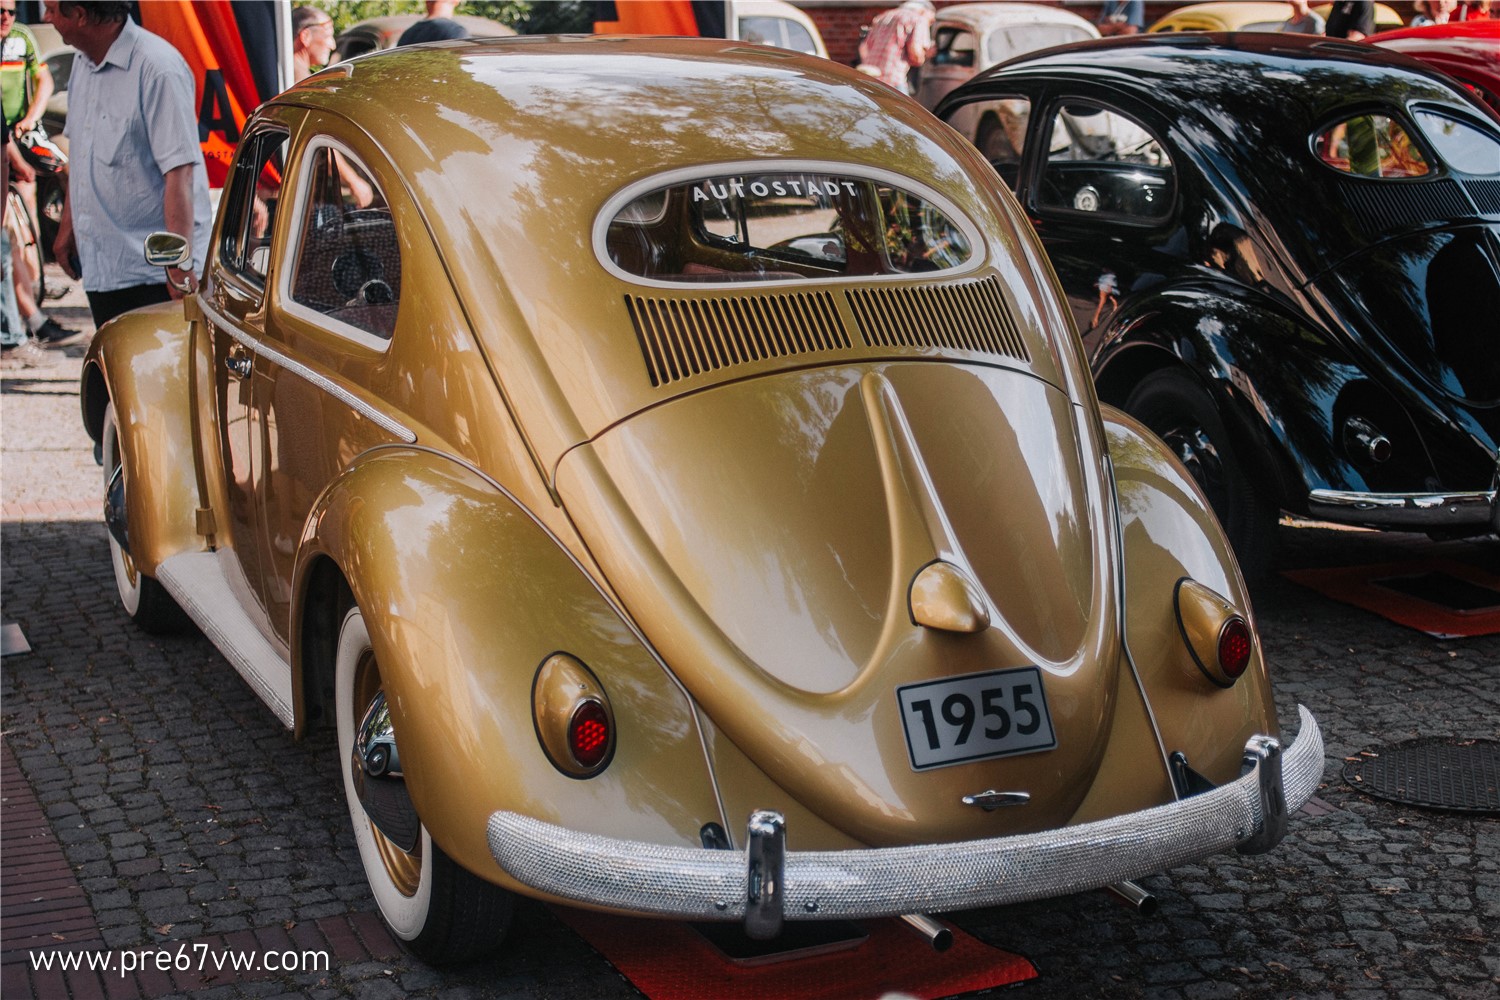 The One Millionth Beetle from 1955 at Hessisch Oldendorf 2022